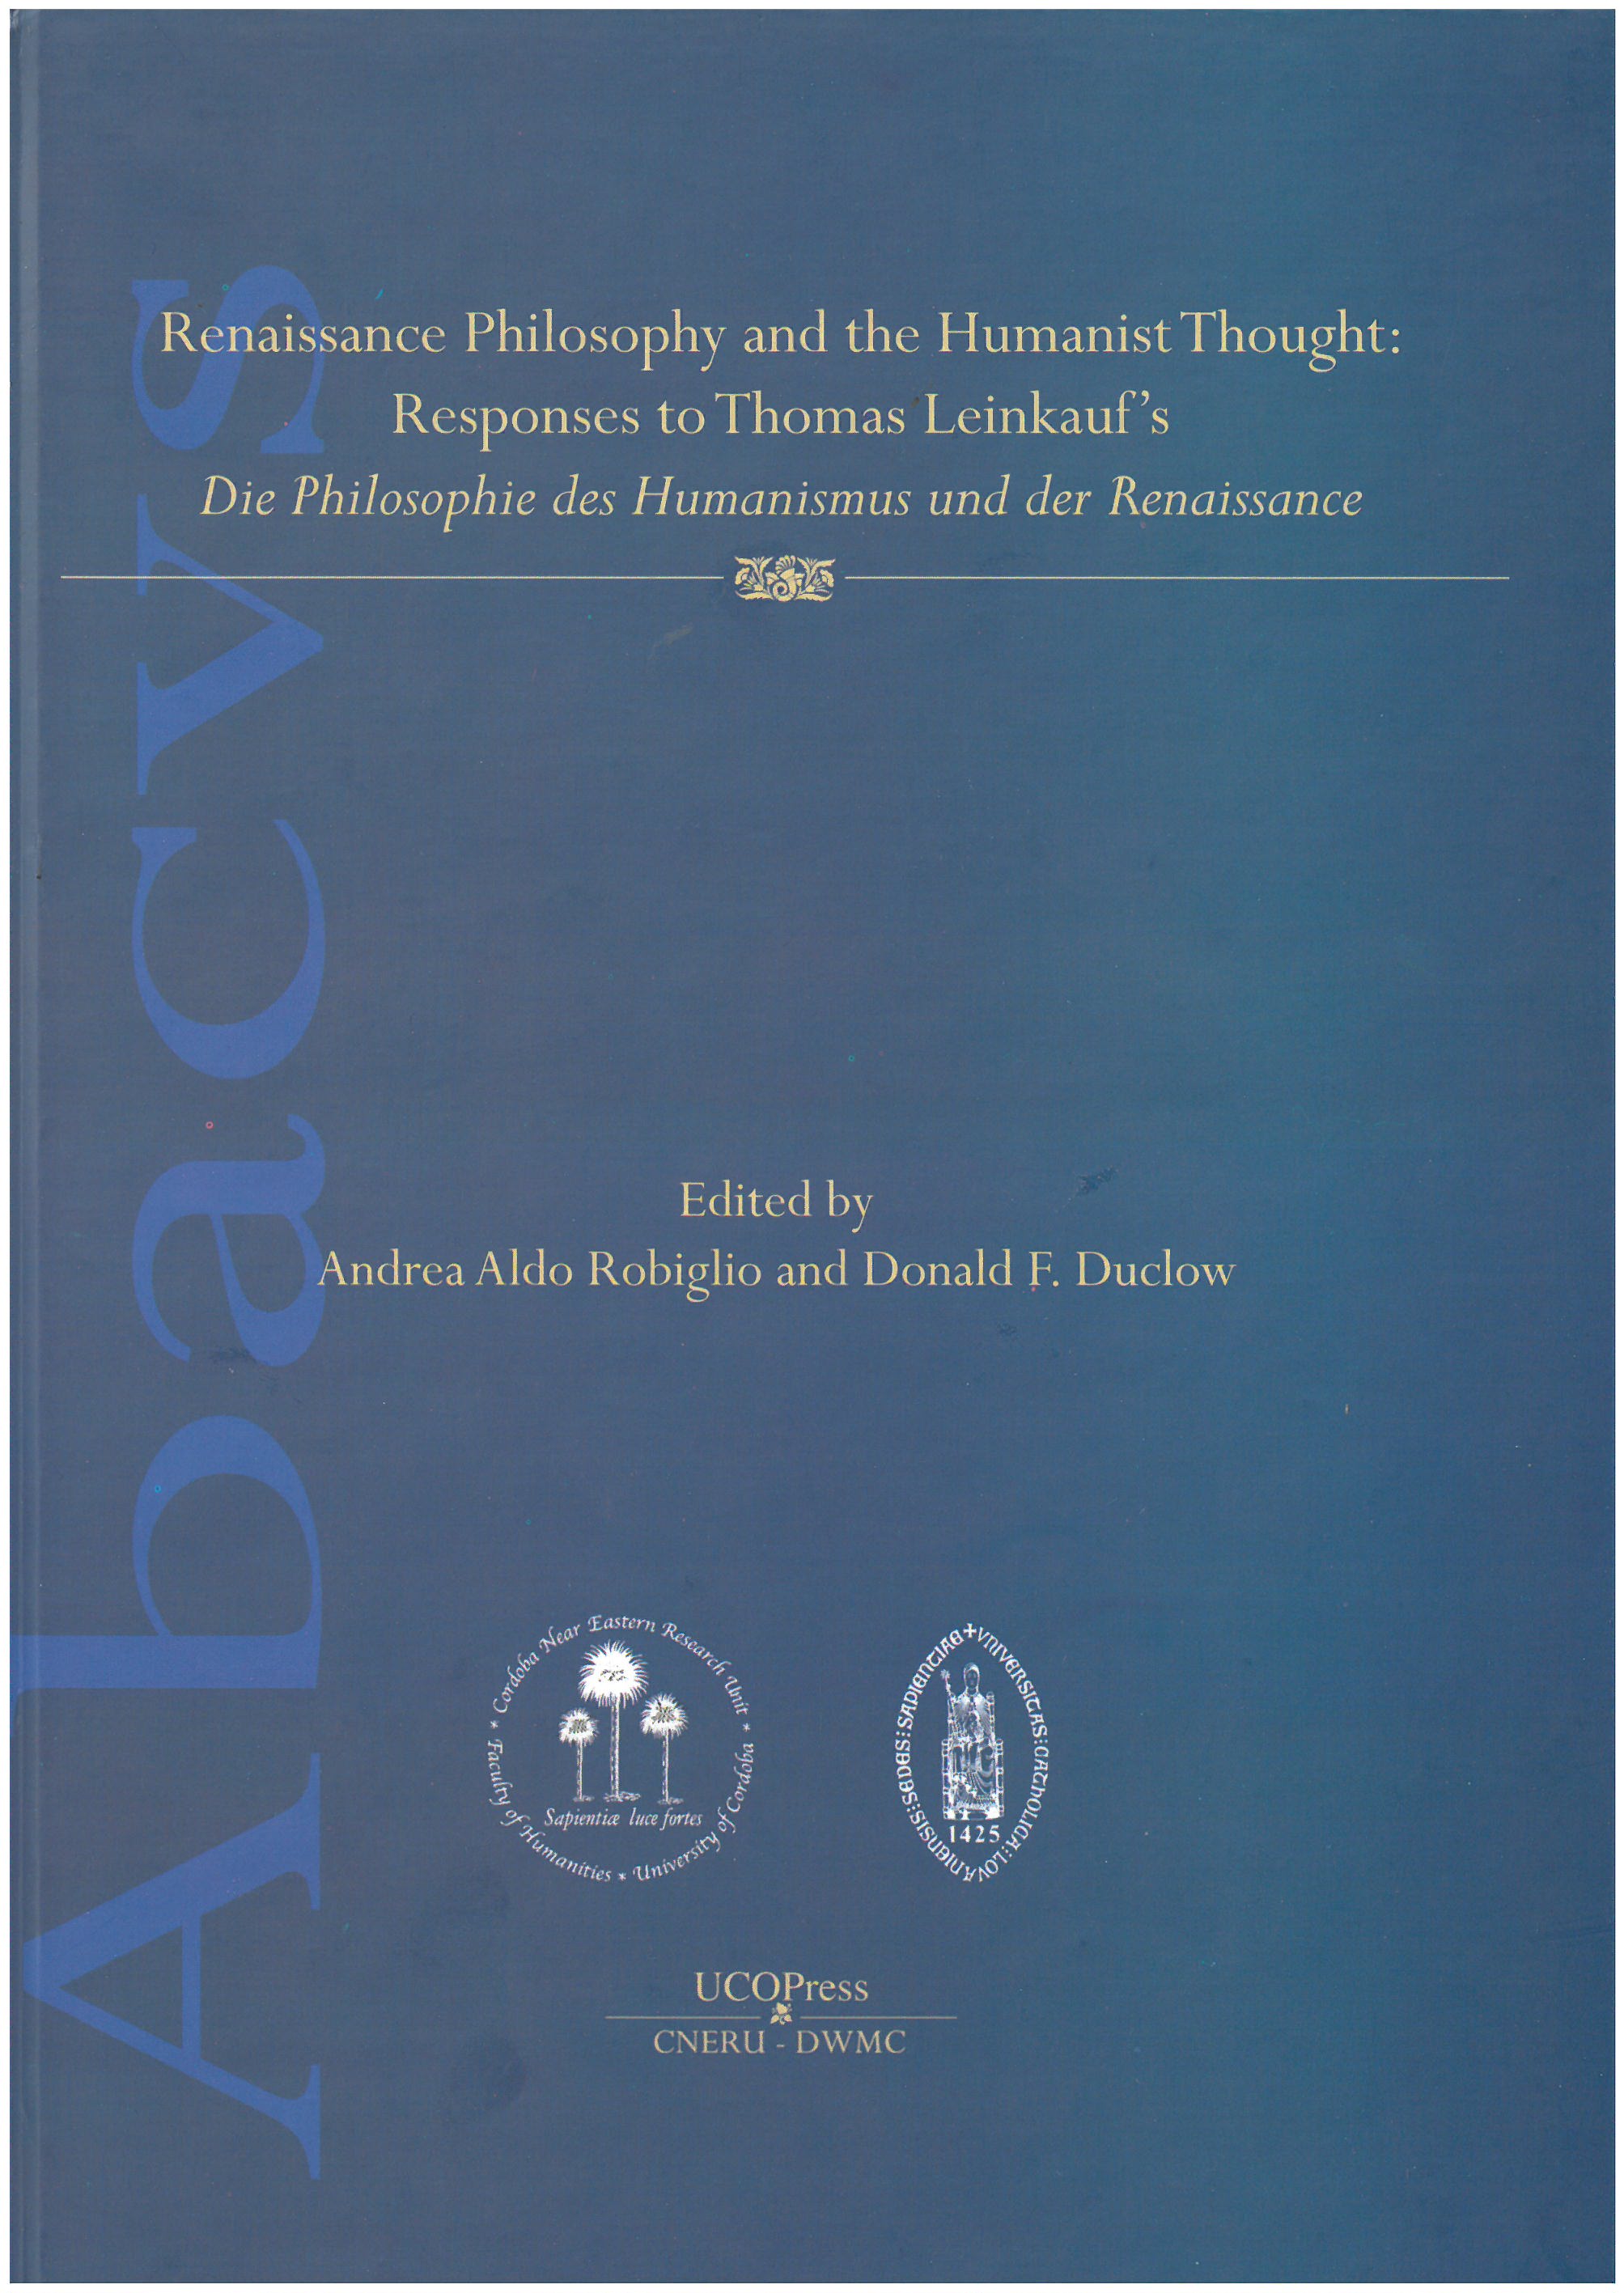 Renaissance Philosophy and the Humanist Thought: responses to Thomas Leinkauf's